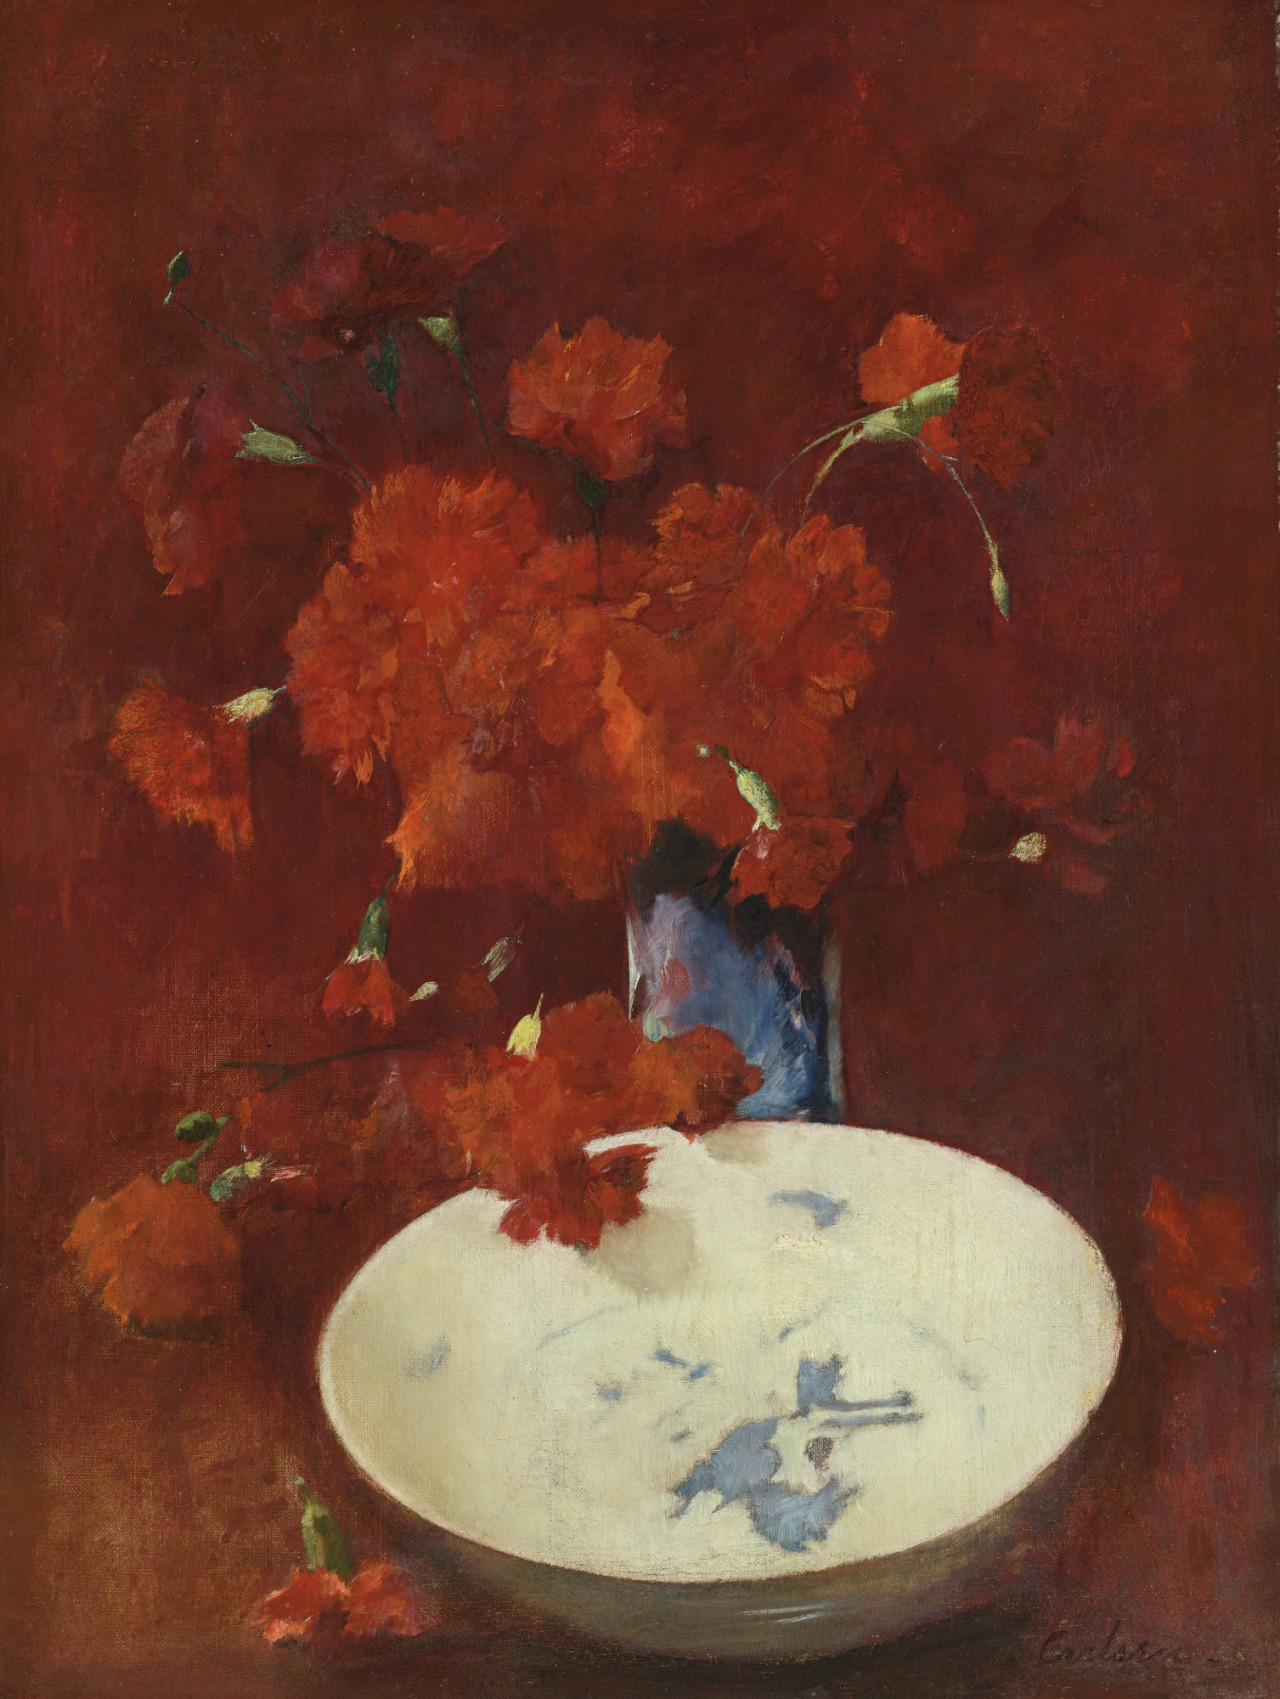 Emil Carlsen : Red carnations and delft, 1875.